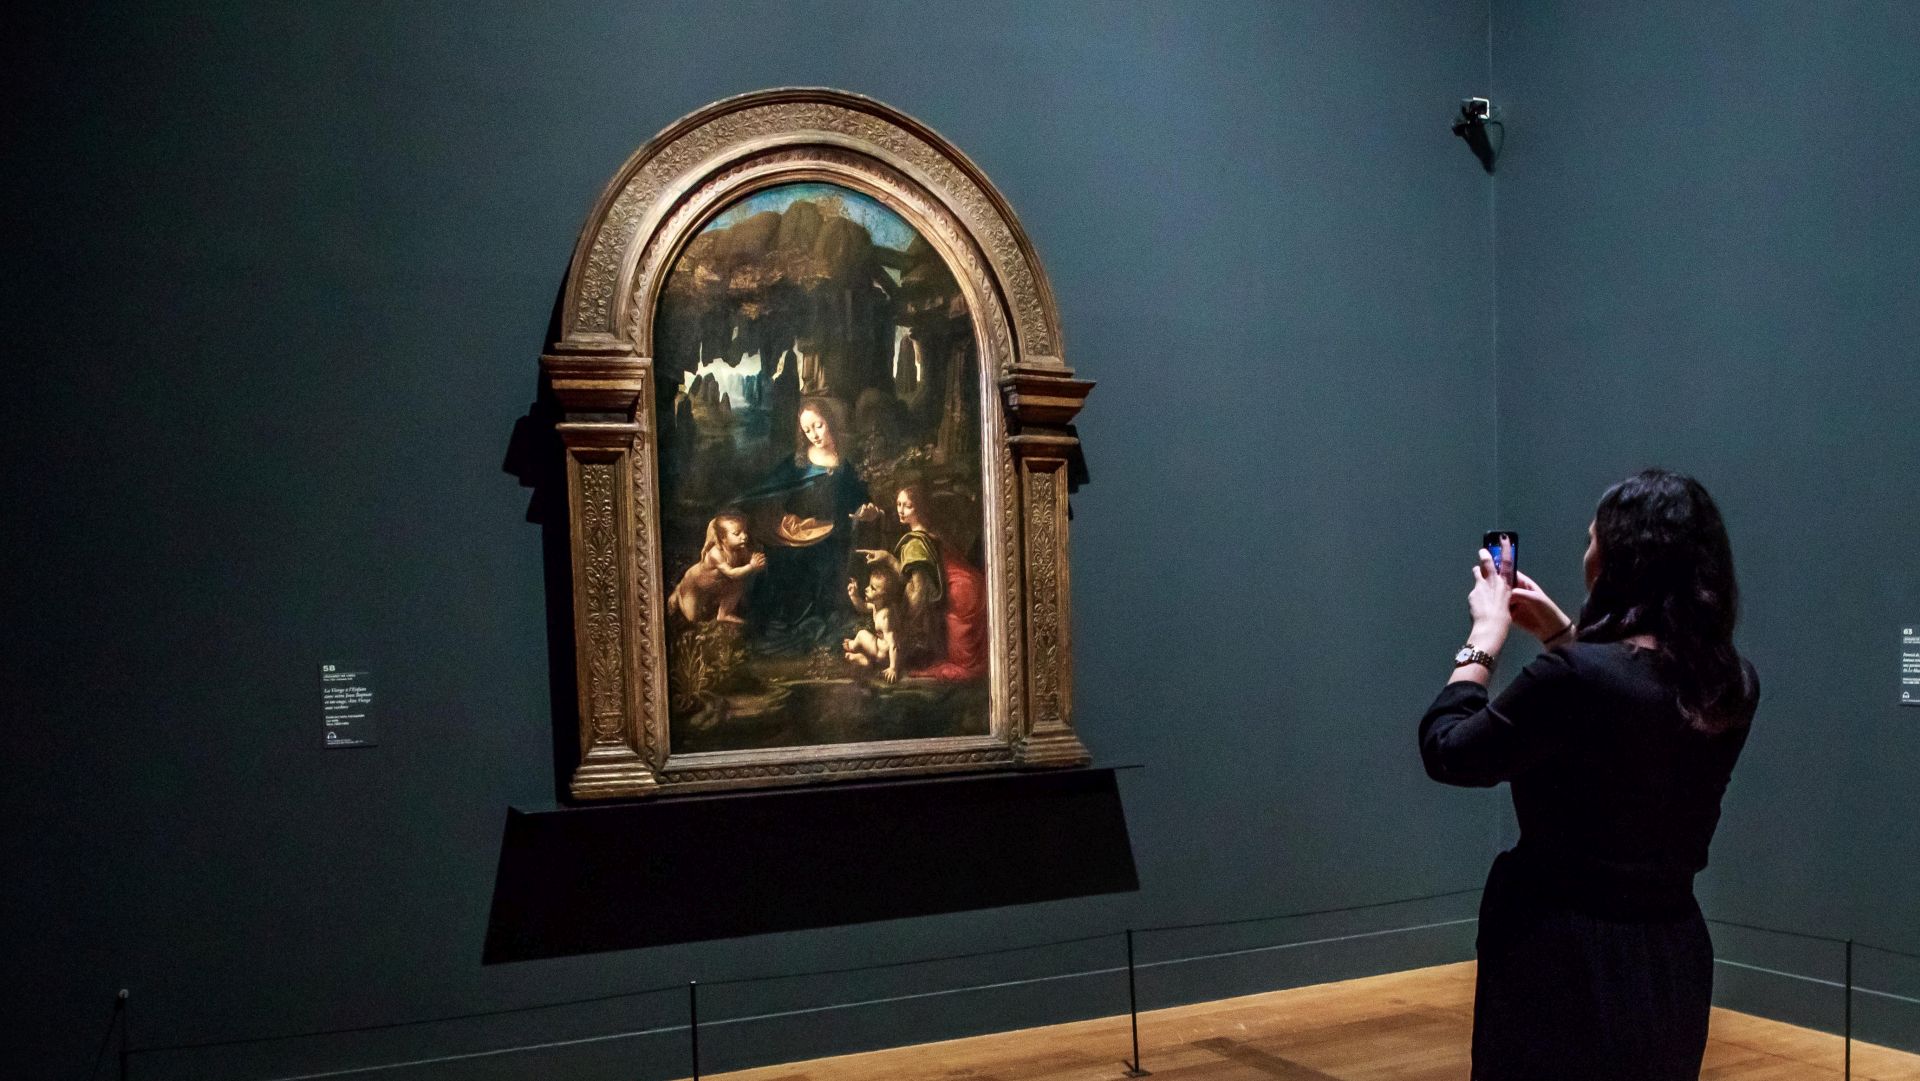 epa07940139 A visitor takes a picture of the painting  entitled 'The Virgin with a Child and Saint John the Baptist' by Italian Renaissance artist Leonardo Da Vinci during an exhibition at the Louvre Museum in Paris, France, 22 October 2019. The exhbition running from 24 October 2019 to 24 February 2020 marks the 500th anniversary of Da Vinci's death.  EPA/CHRISTOPHE PETIT TESSON